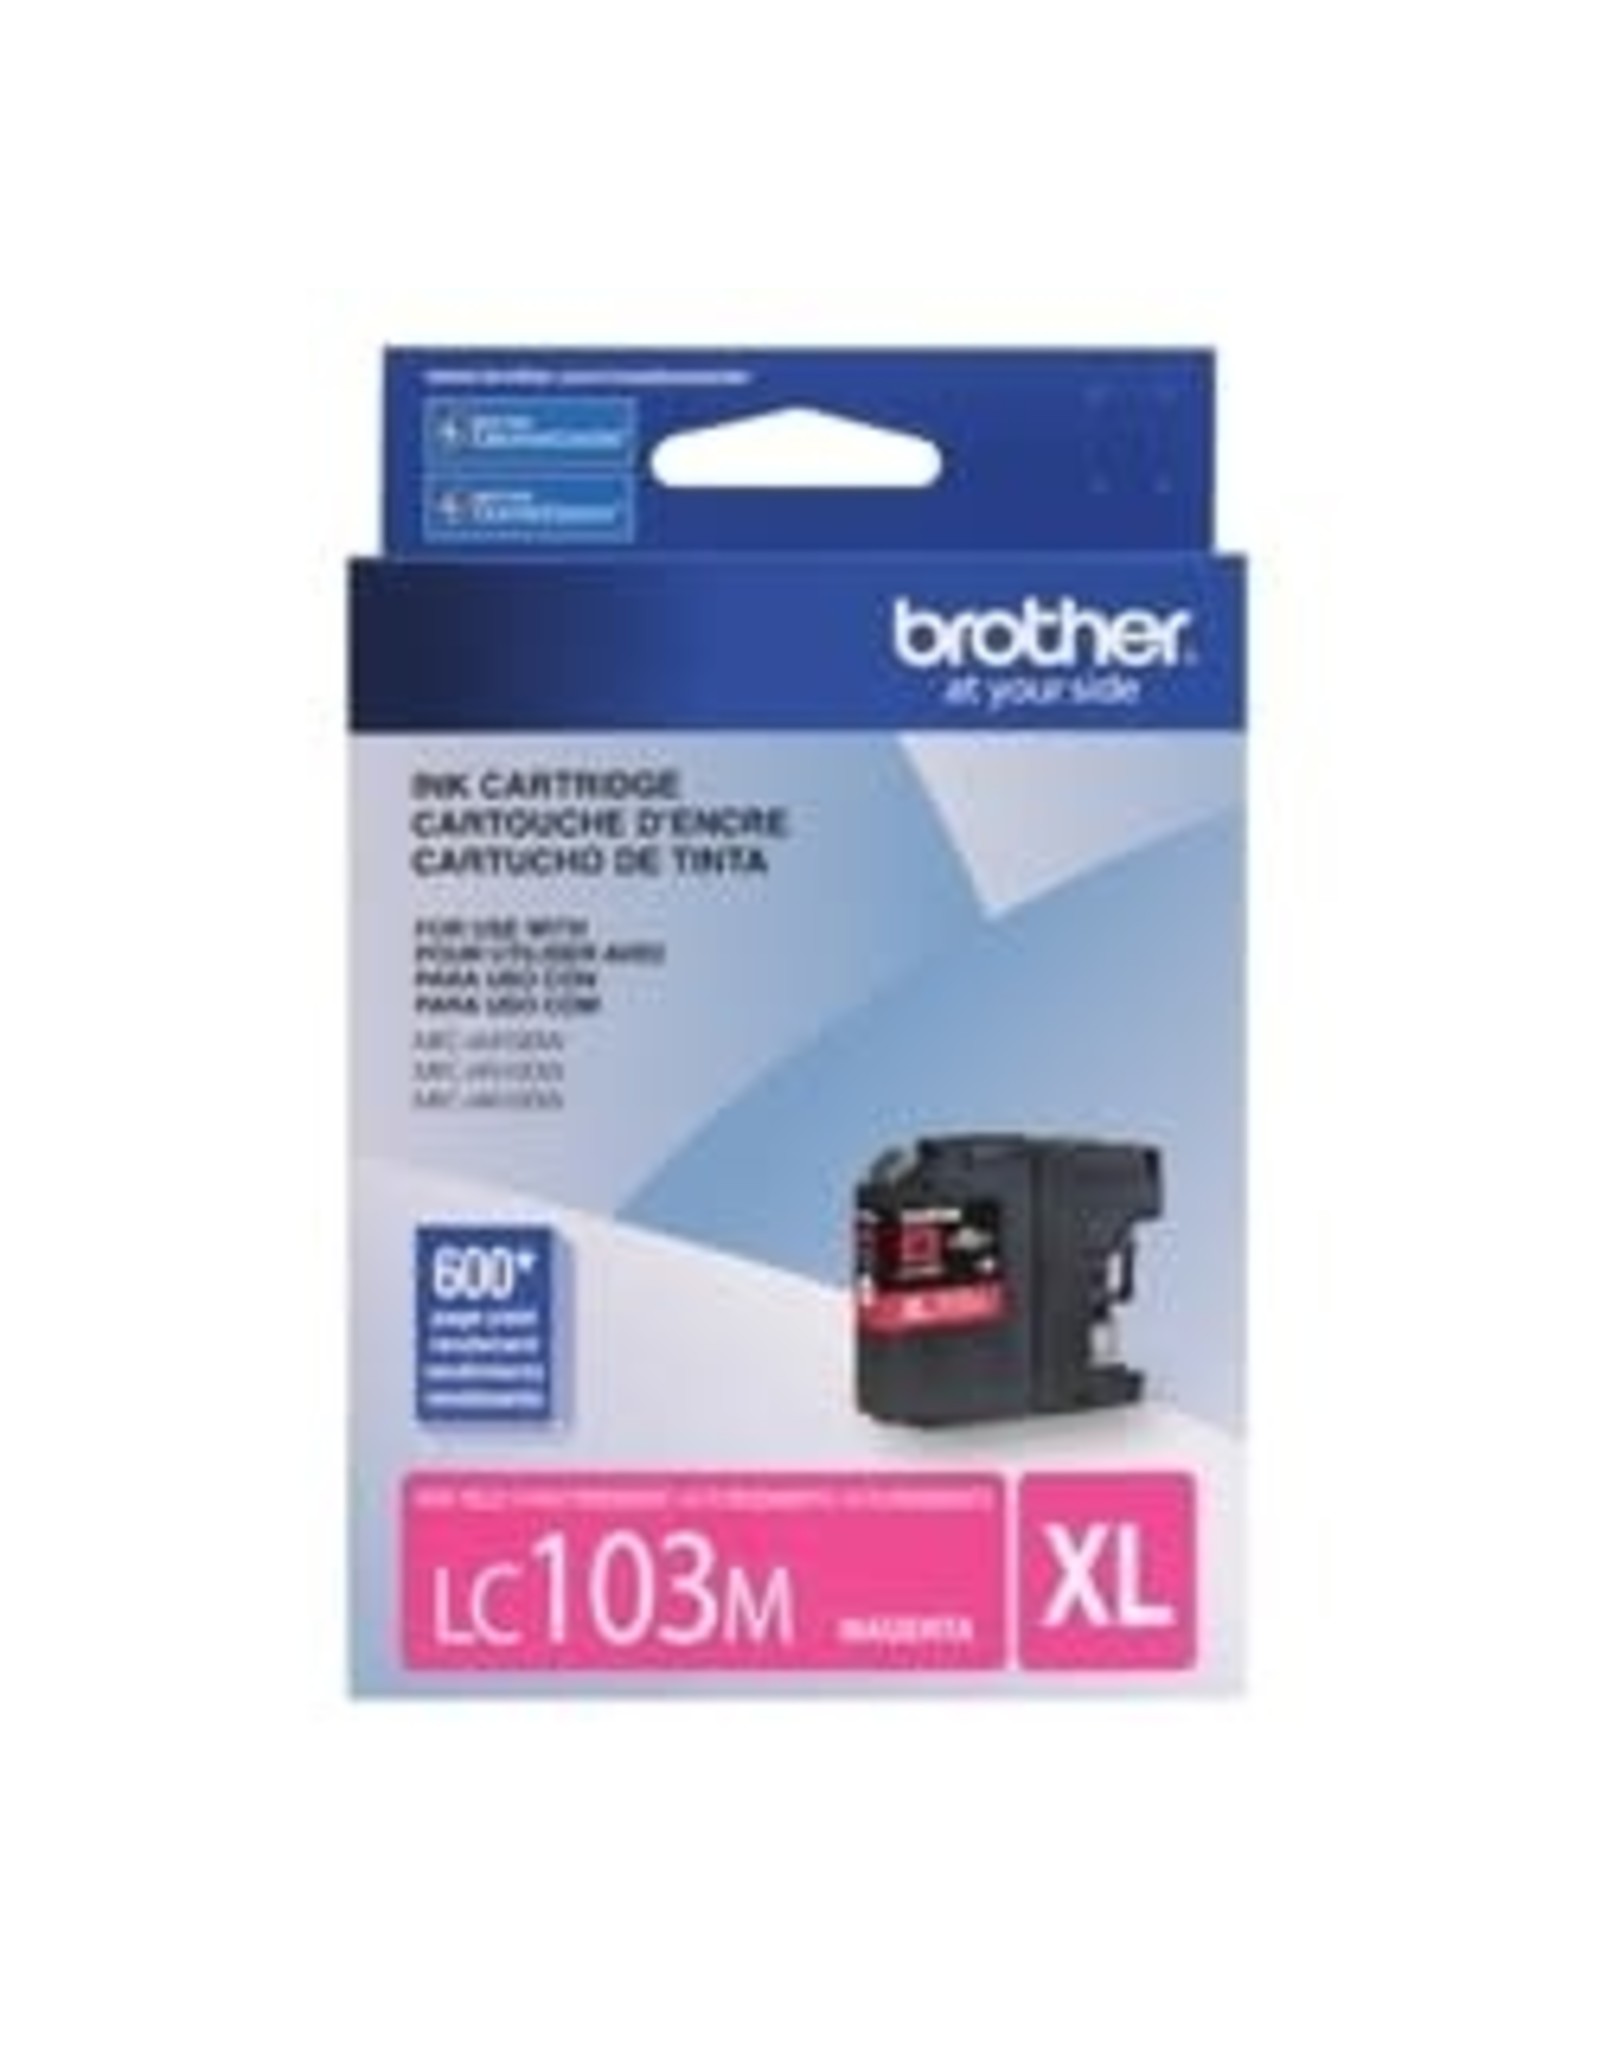 Brother INKJET CARTRIDGE-BROTHER 103 MAGENTA HIGH YIELD